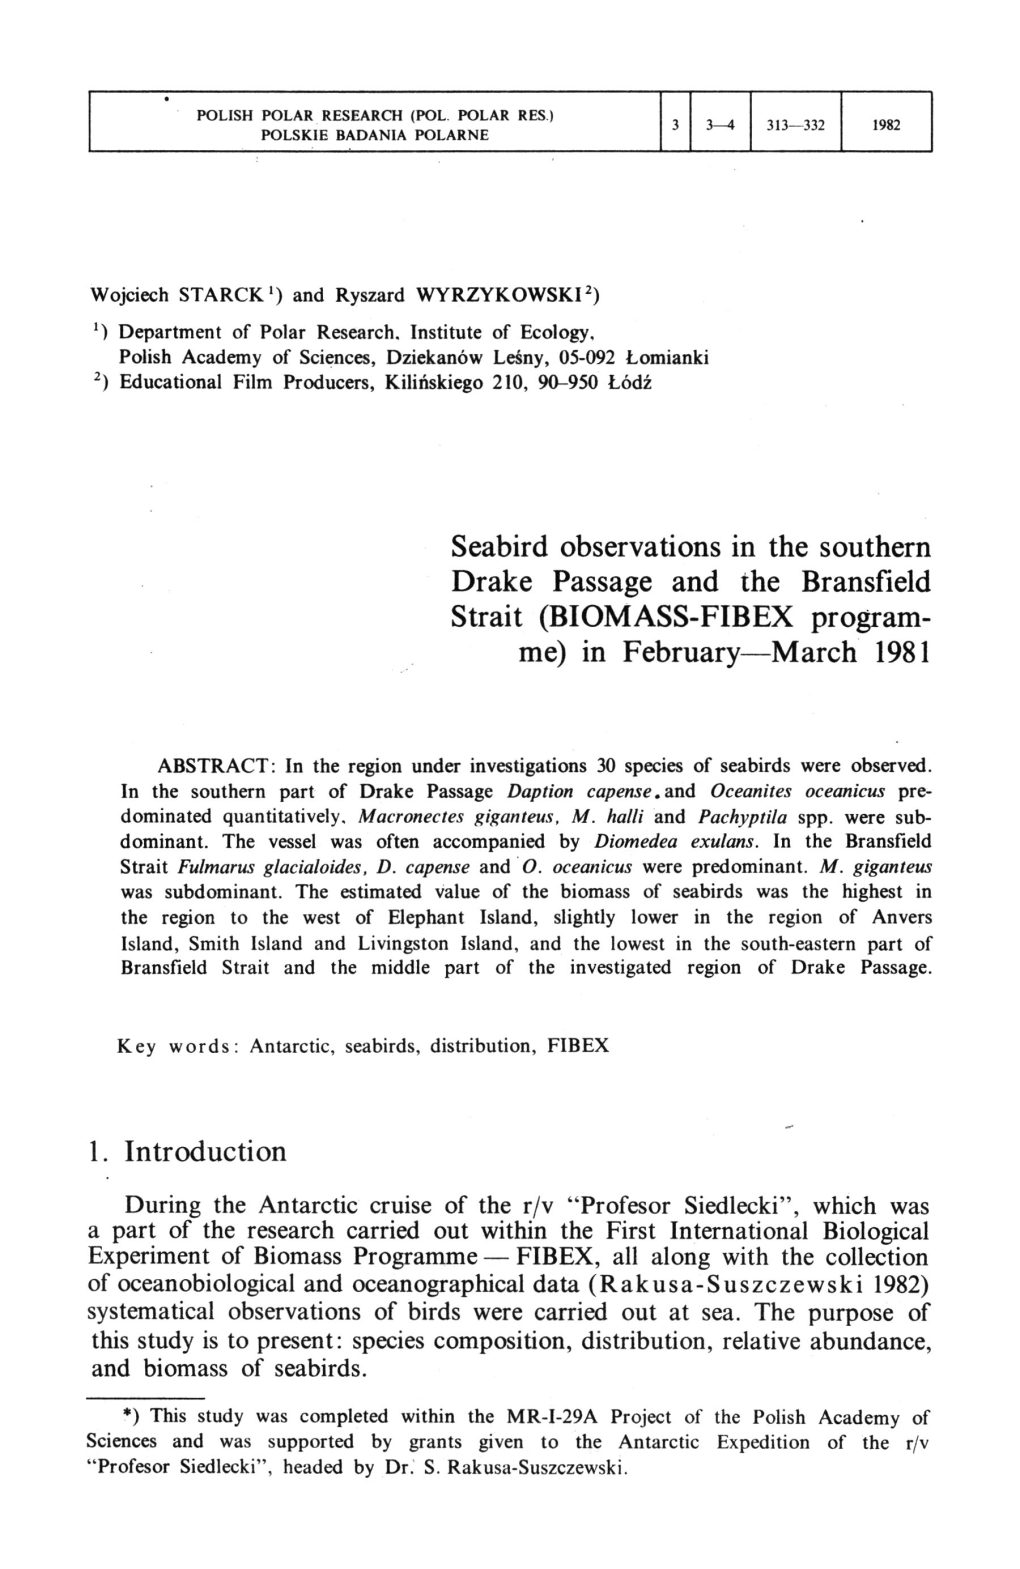 Seabird Observations in the Southern Drake Passage and the Bransfield Strait (BIOMASS-FIBEX Program- Me) in February—March 1981